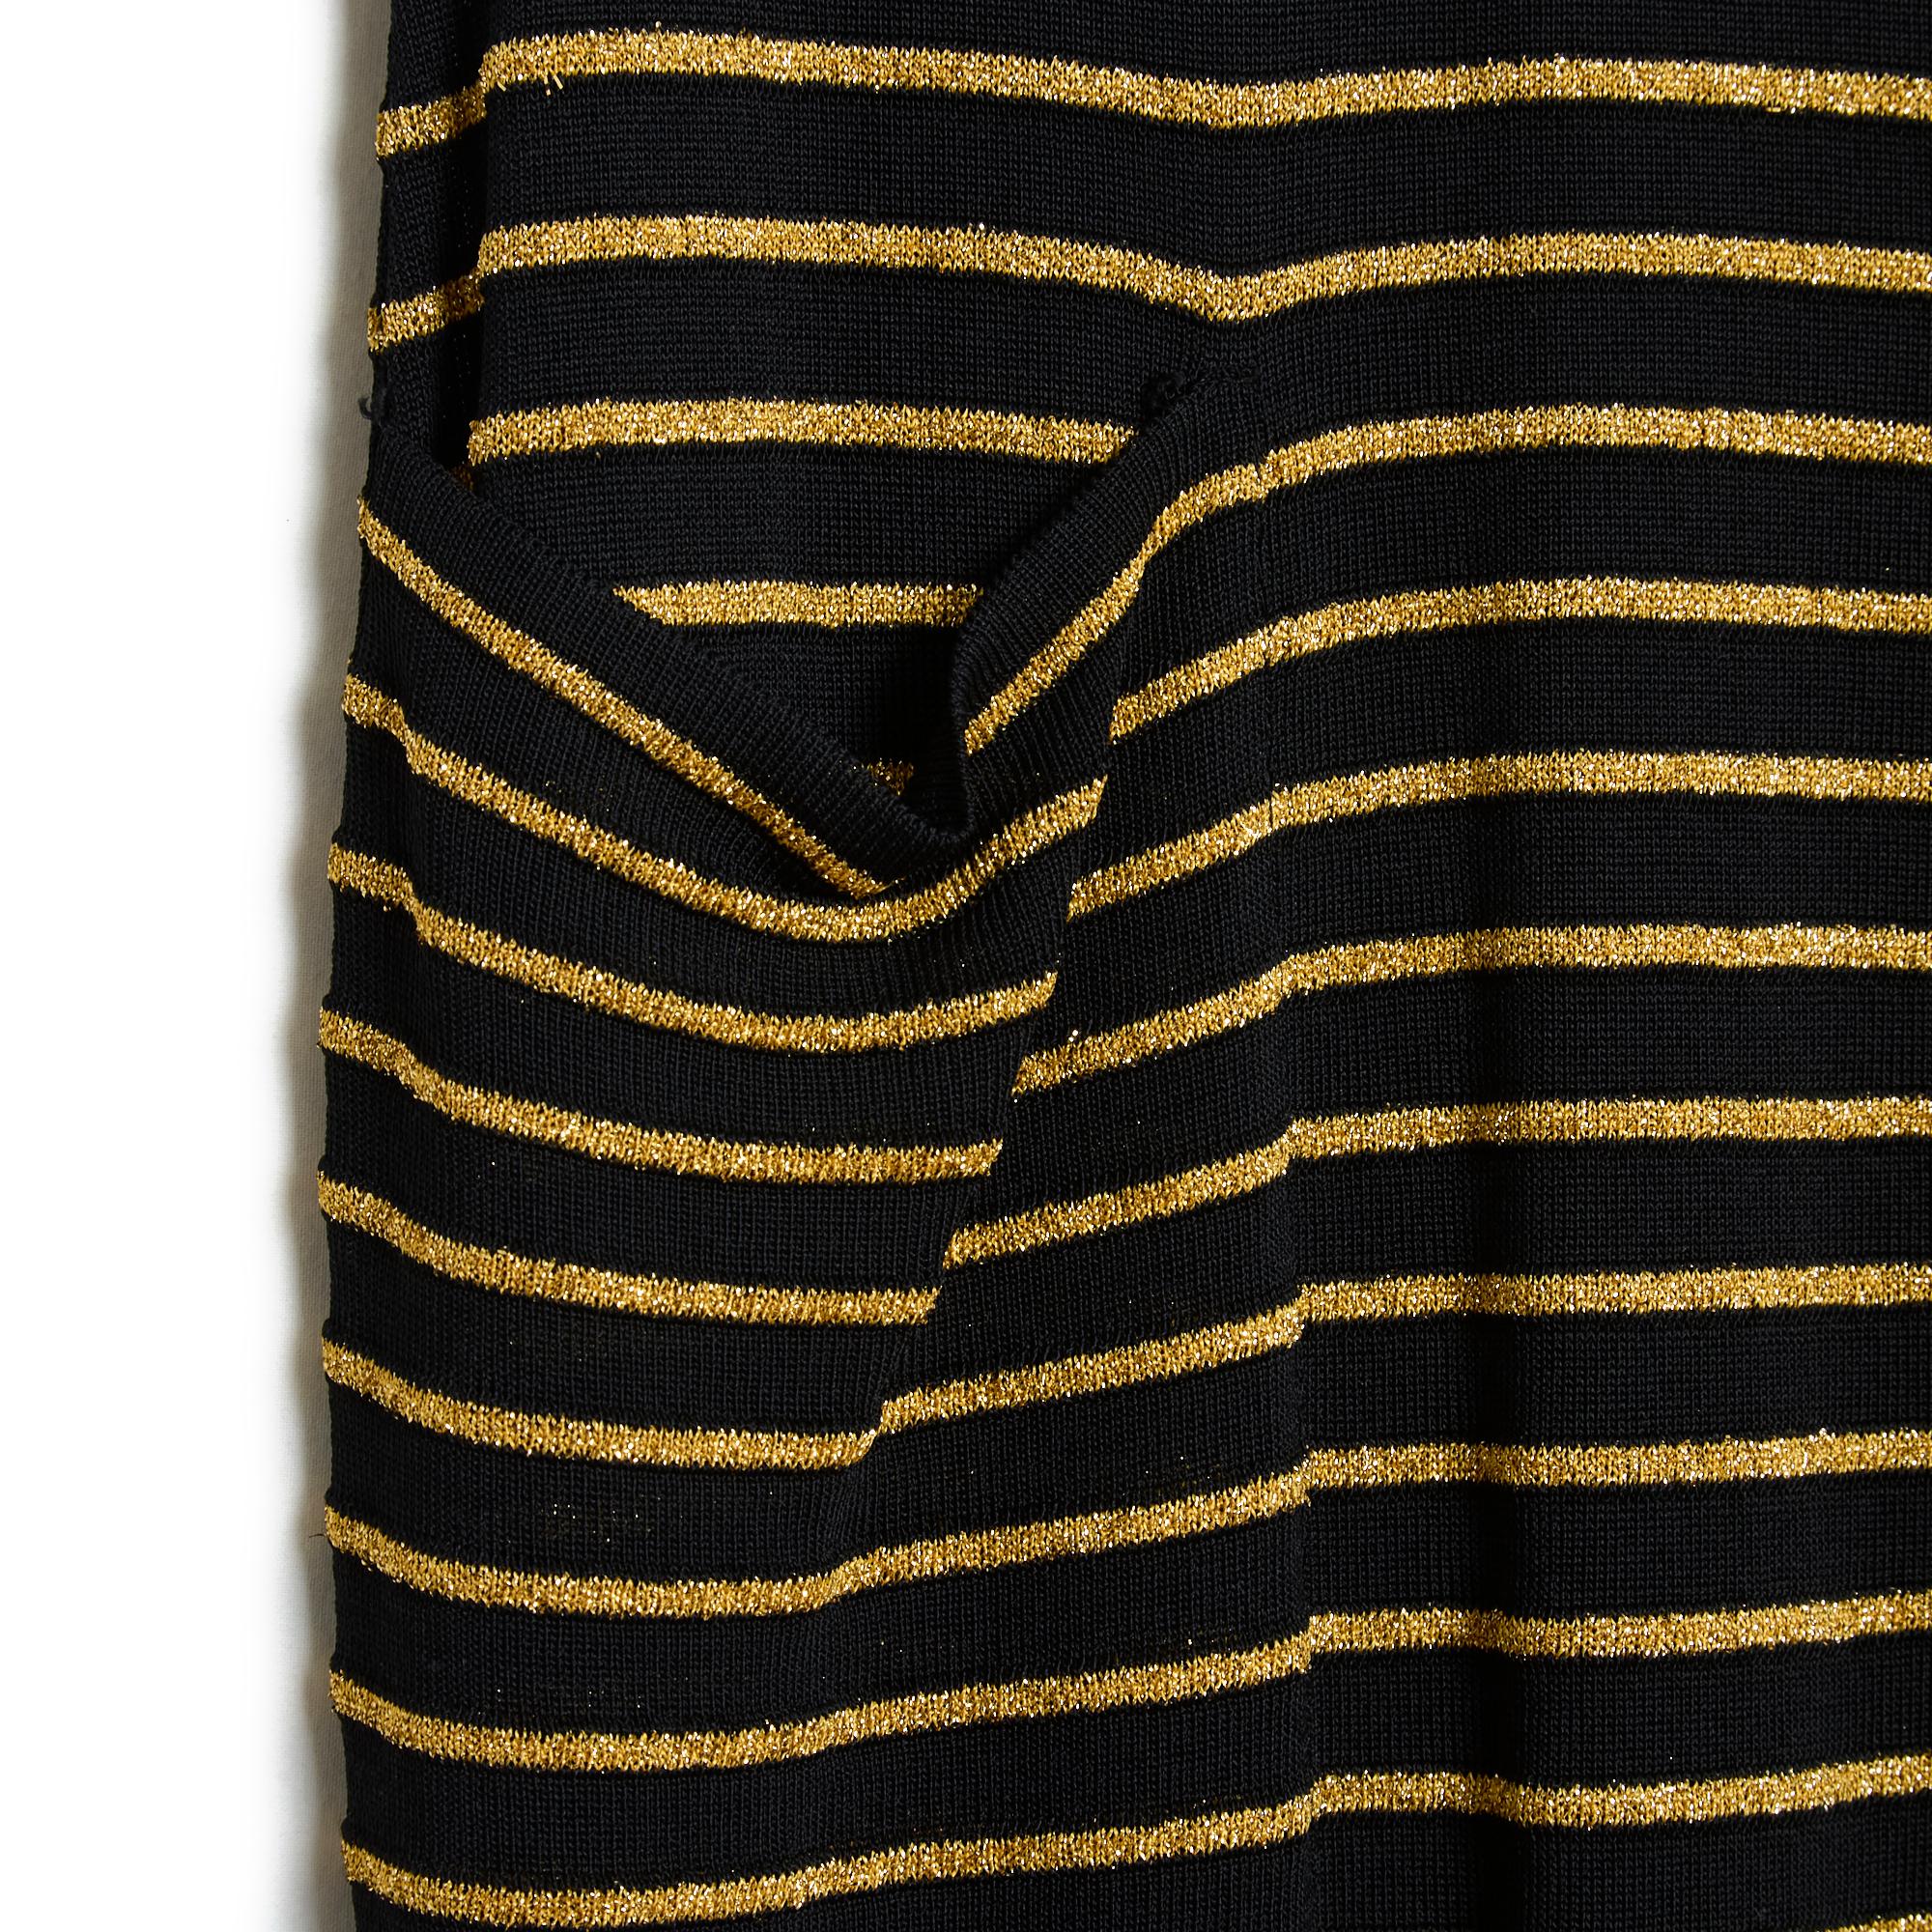 Yves Saint Laurent long dress circa 1990 in black viscose knit striped with gold lurex, wide boat neck, 2 patch pockets on the hips, short sleeves, unlined (therefore slightly transparent). No more material or size label but the measurements (taken